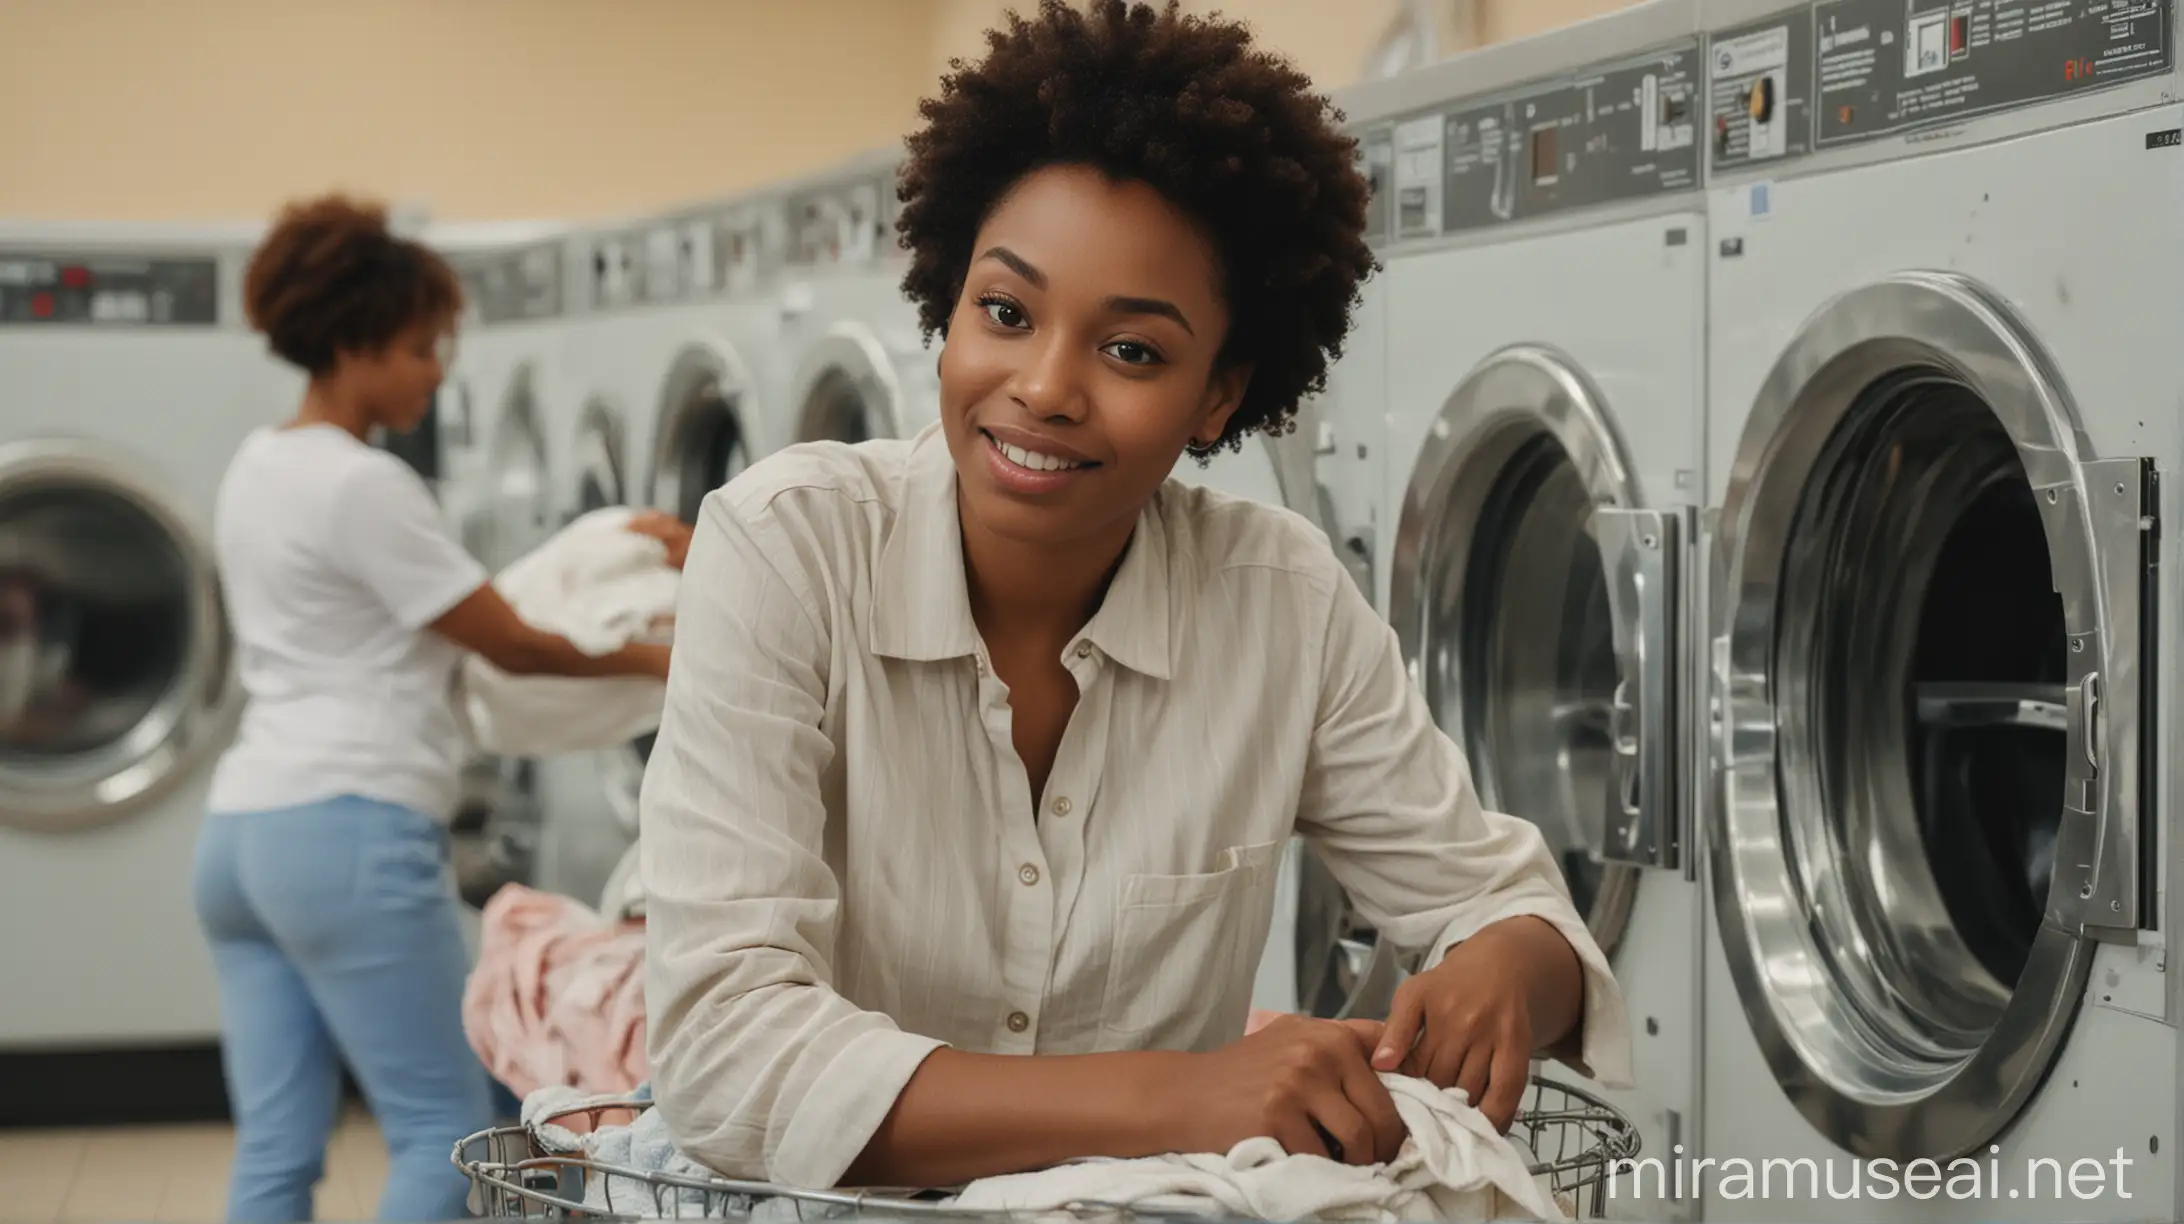 African American Woman Doing Laundry in a Vibrant Laundromat